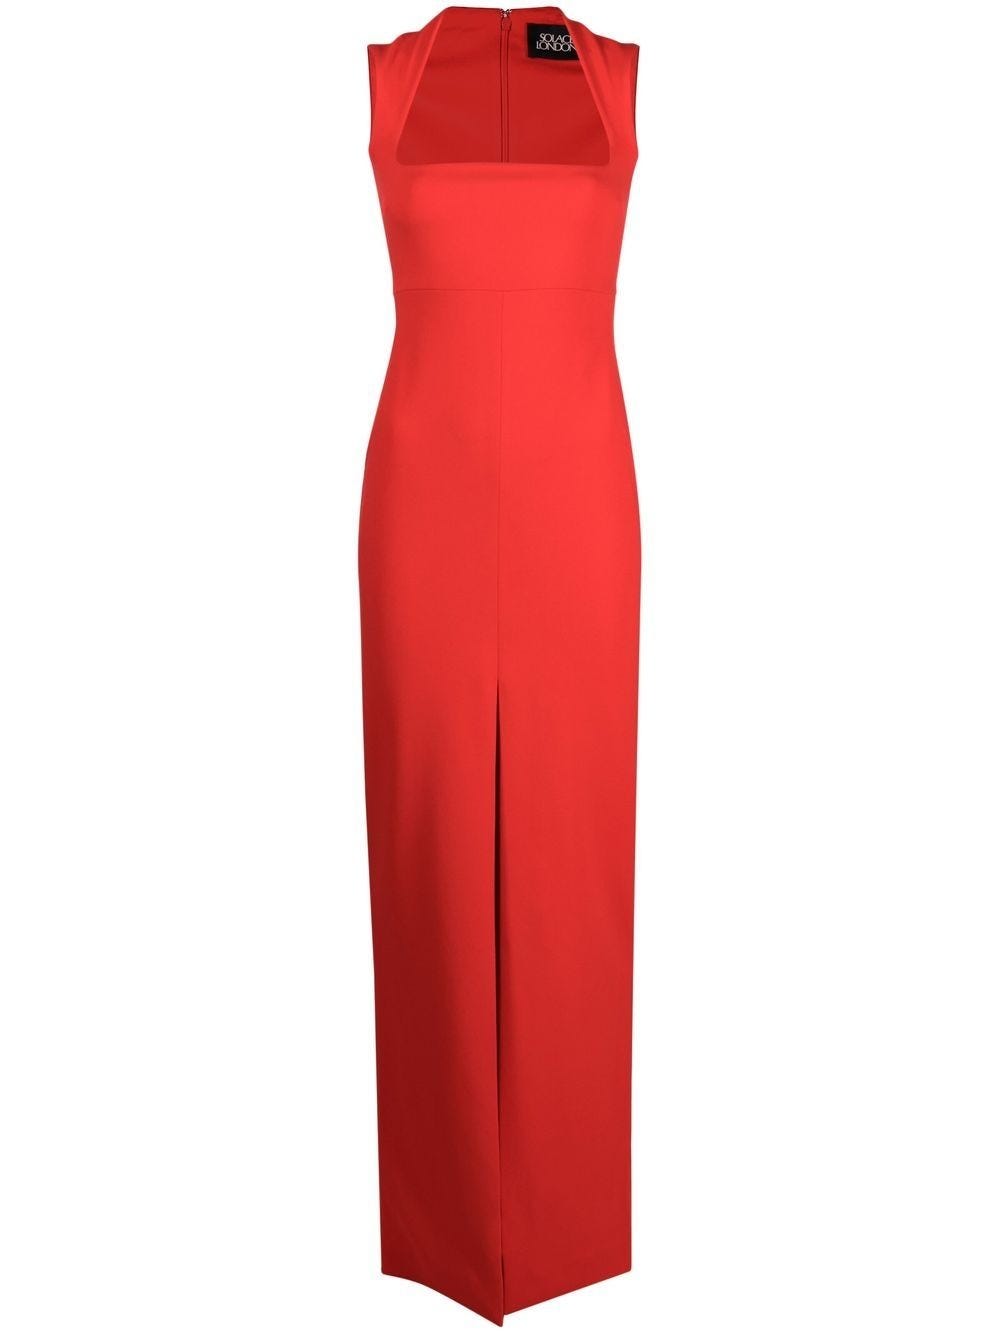 SOLACE LONDON SOFIA RED LONG DRESS WITH SQUARE NECKLINE